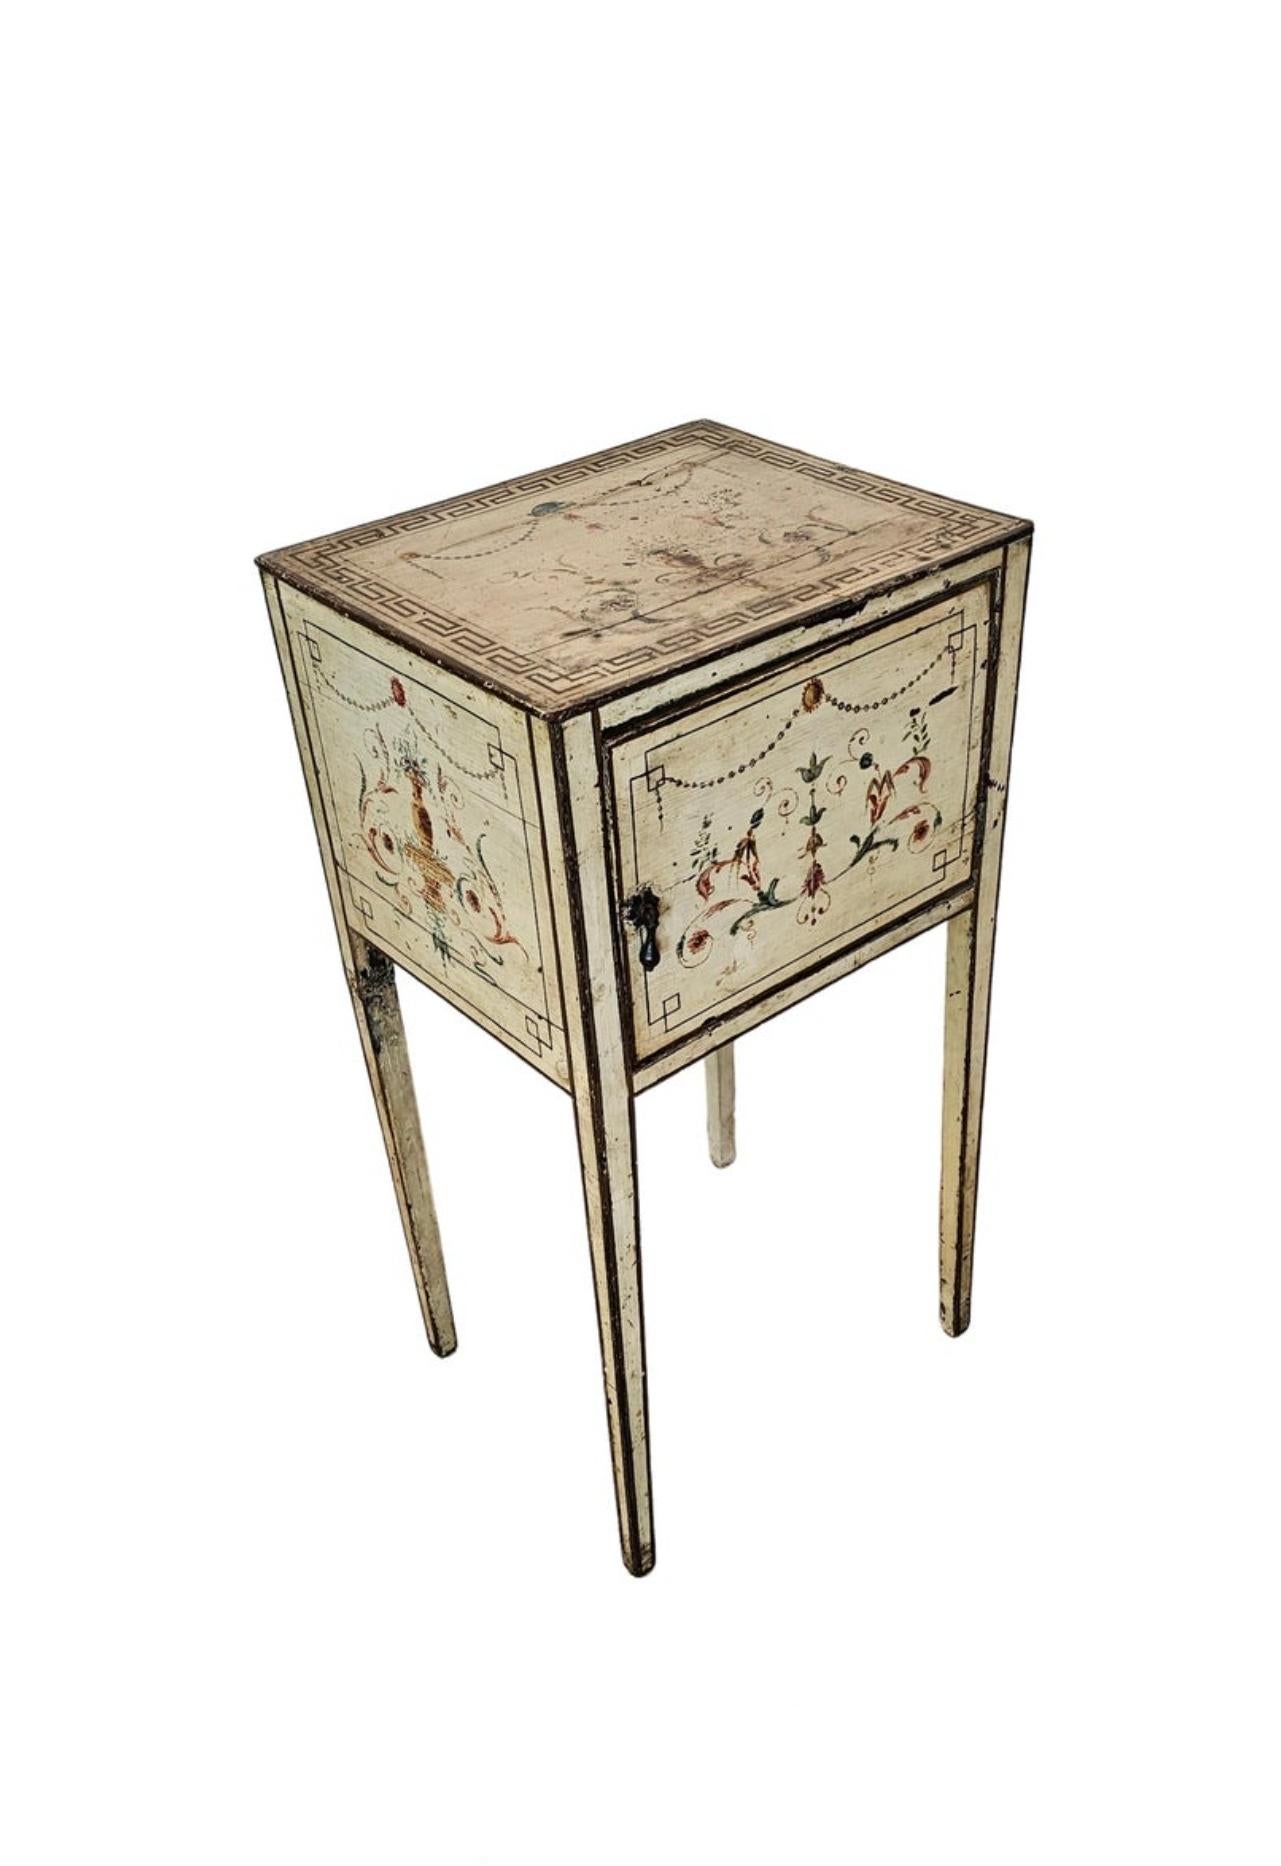 A most charming antique Italian Neoclassical style paint-decorated bedside cabinet with beautifully aged heavily distressed patina. 

Born in Italy in the late 19th century, hand-crafted solid wood construction, antique cream base ornamented in